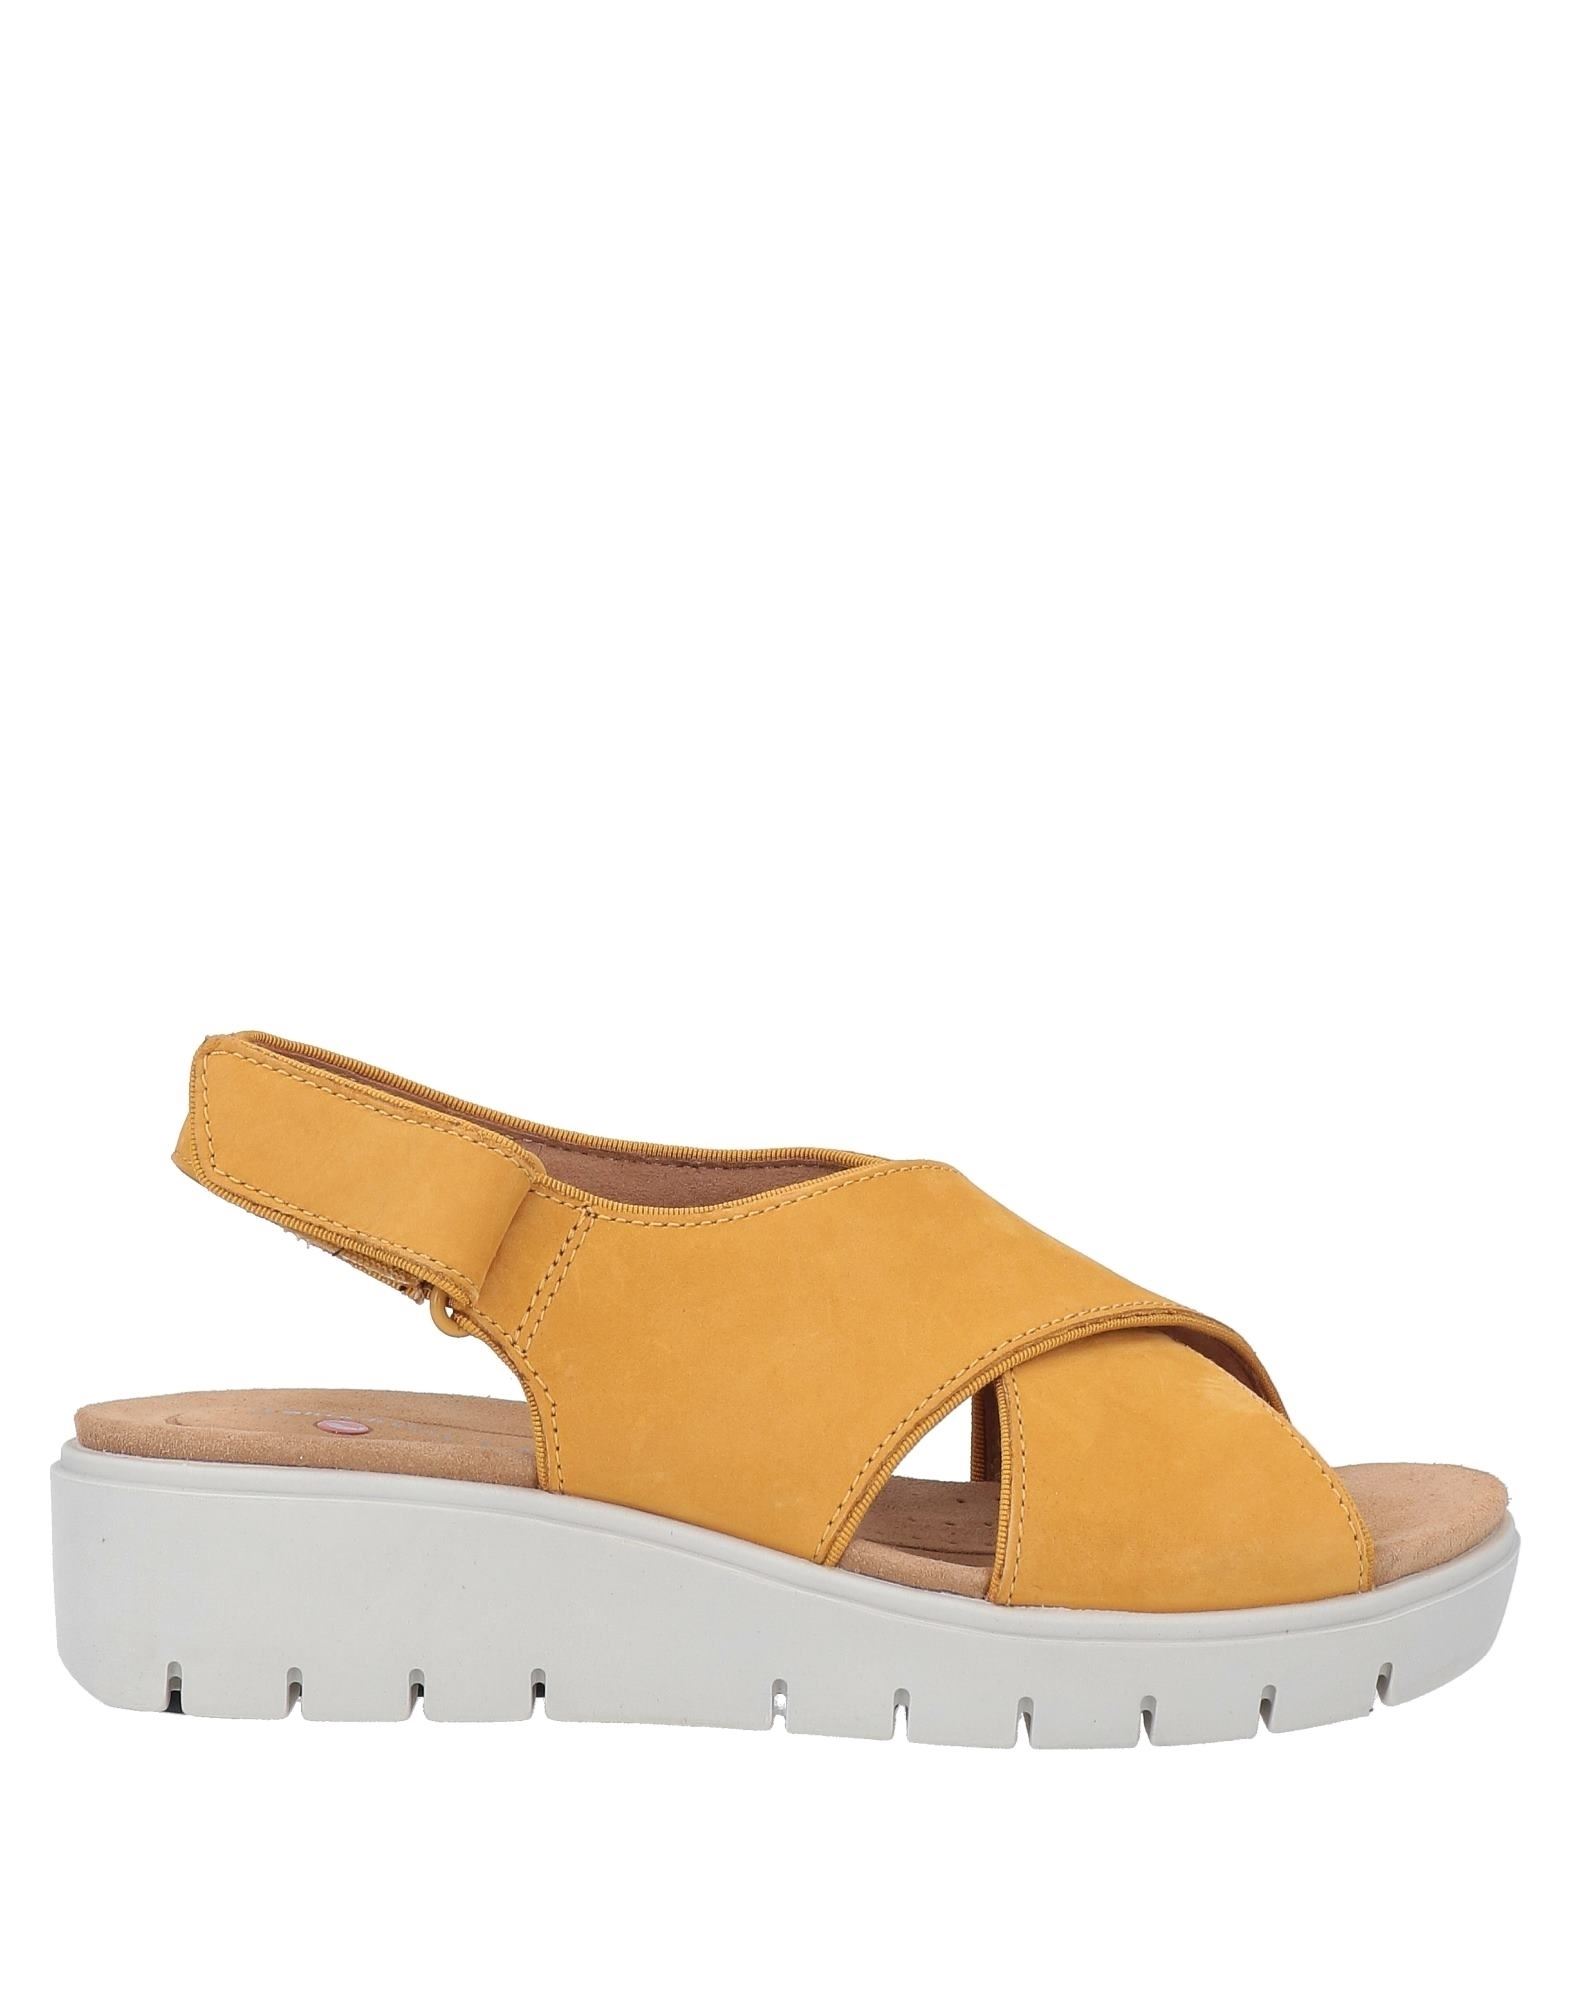 UNSTRUCTURED by CLARKS Sandals